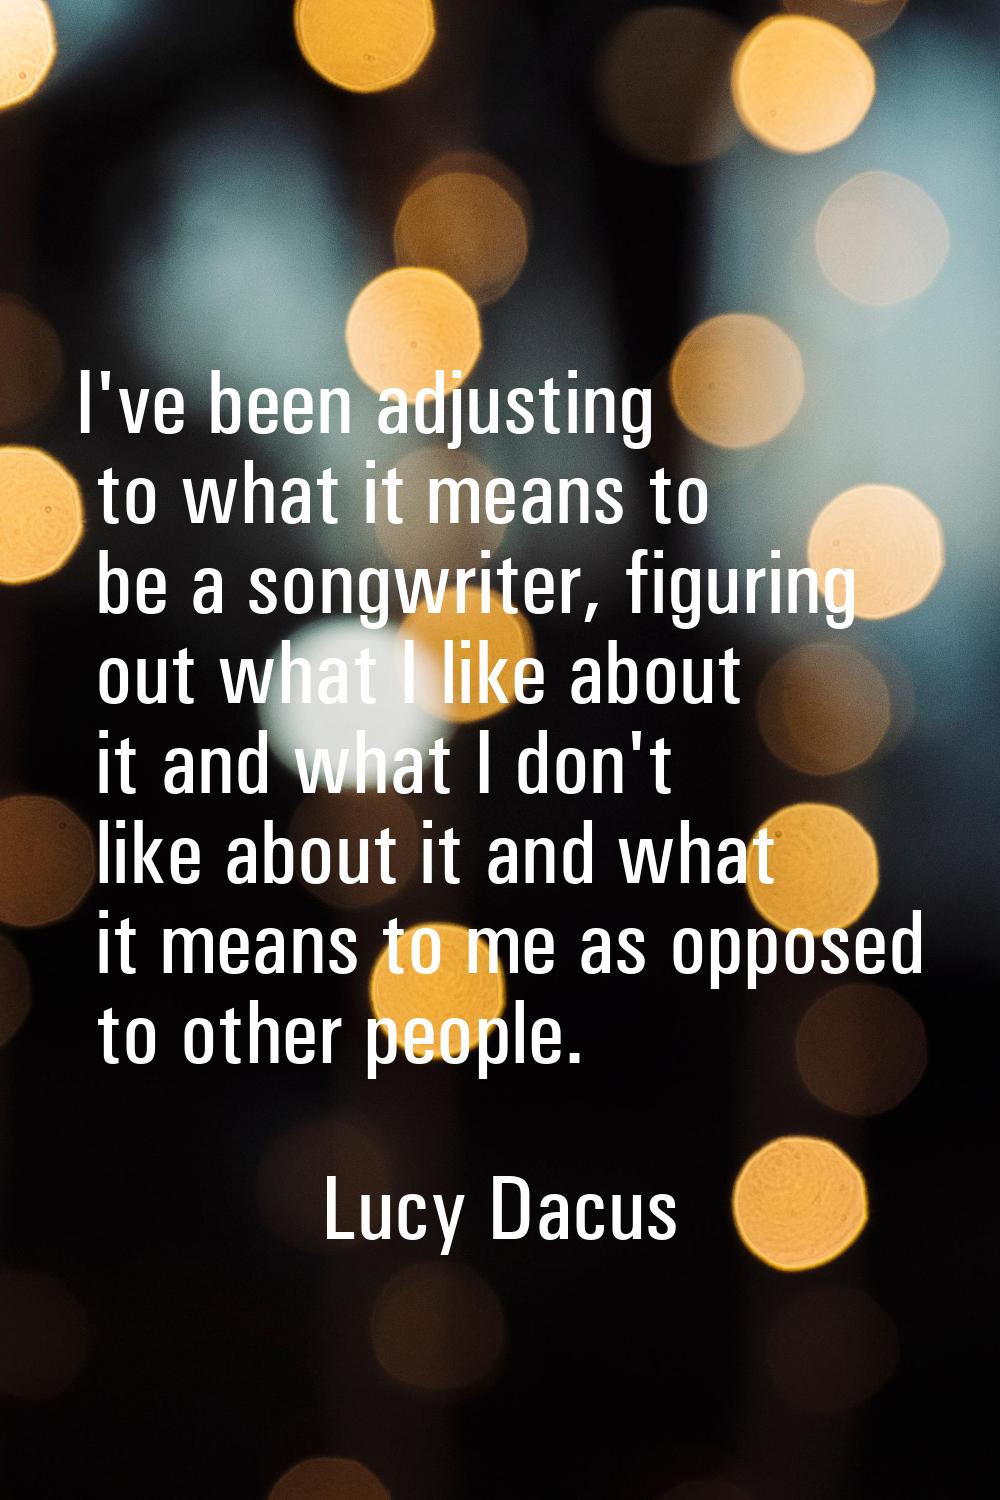 I've been adjusting to what it means to be a songwriter, figuring out what I like about it and what